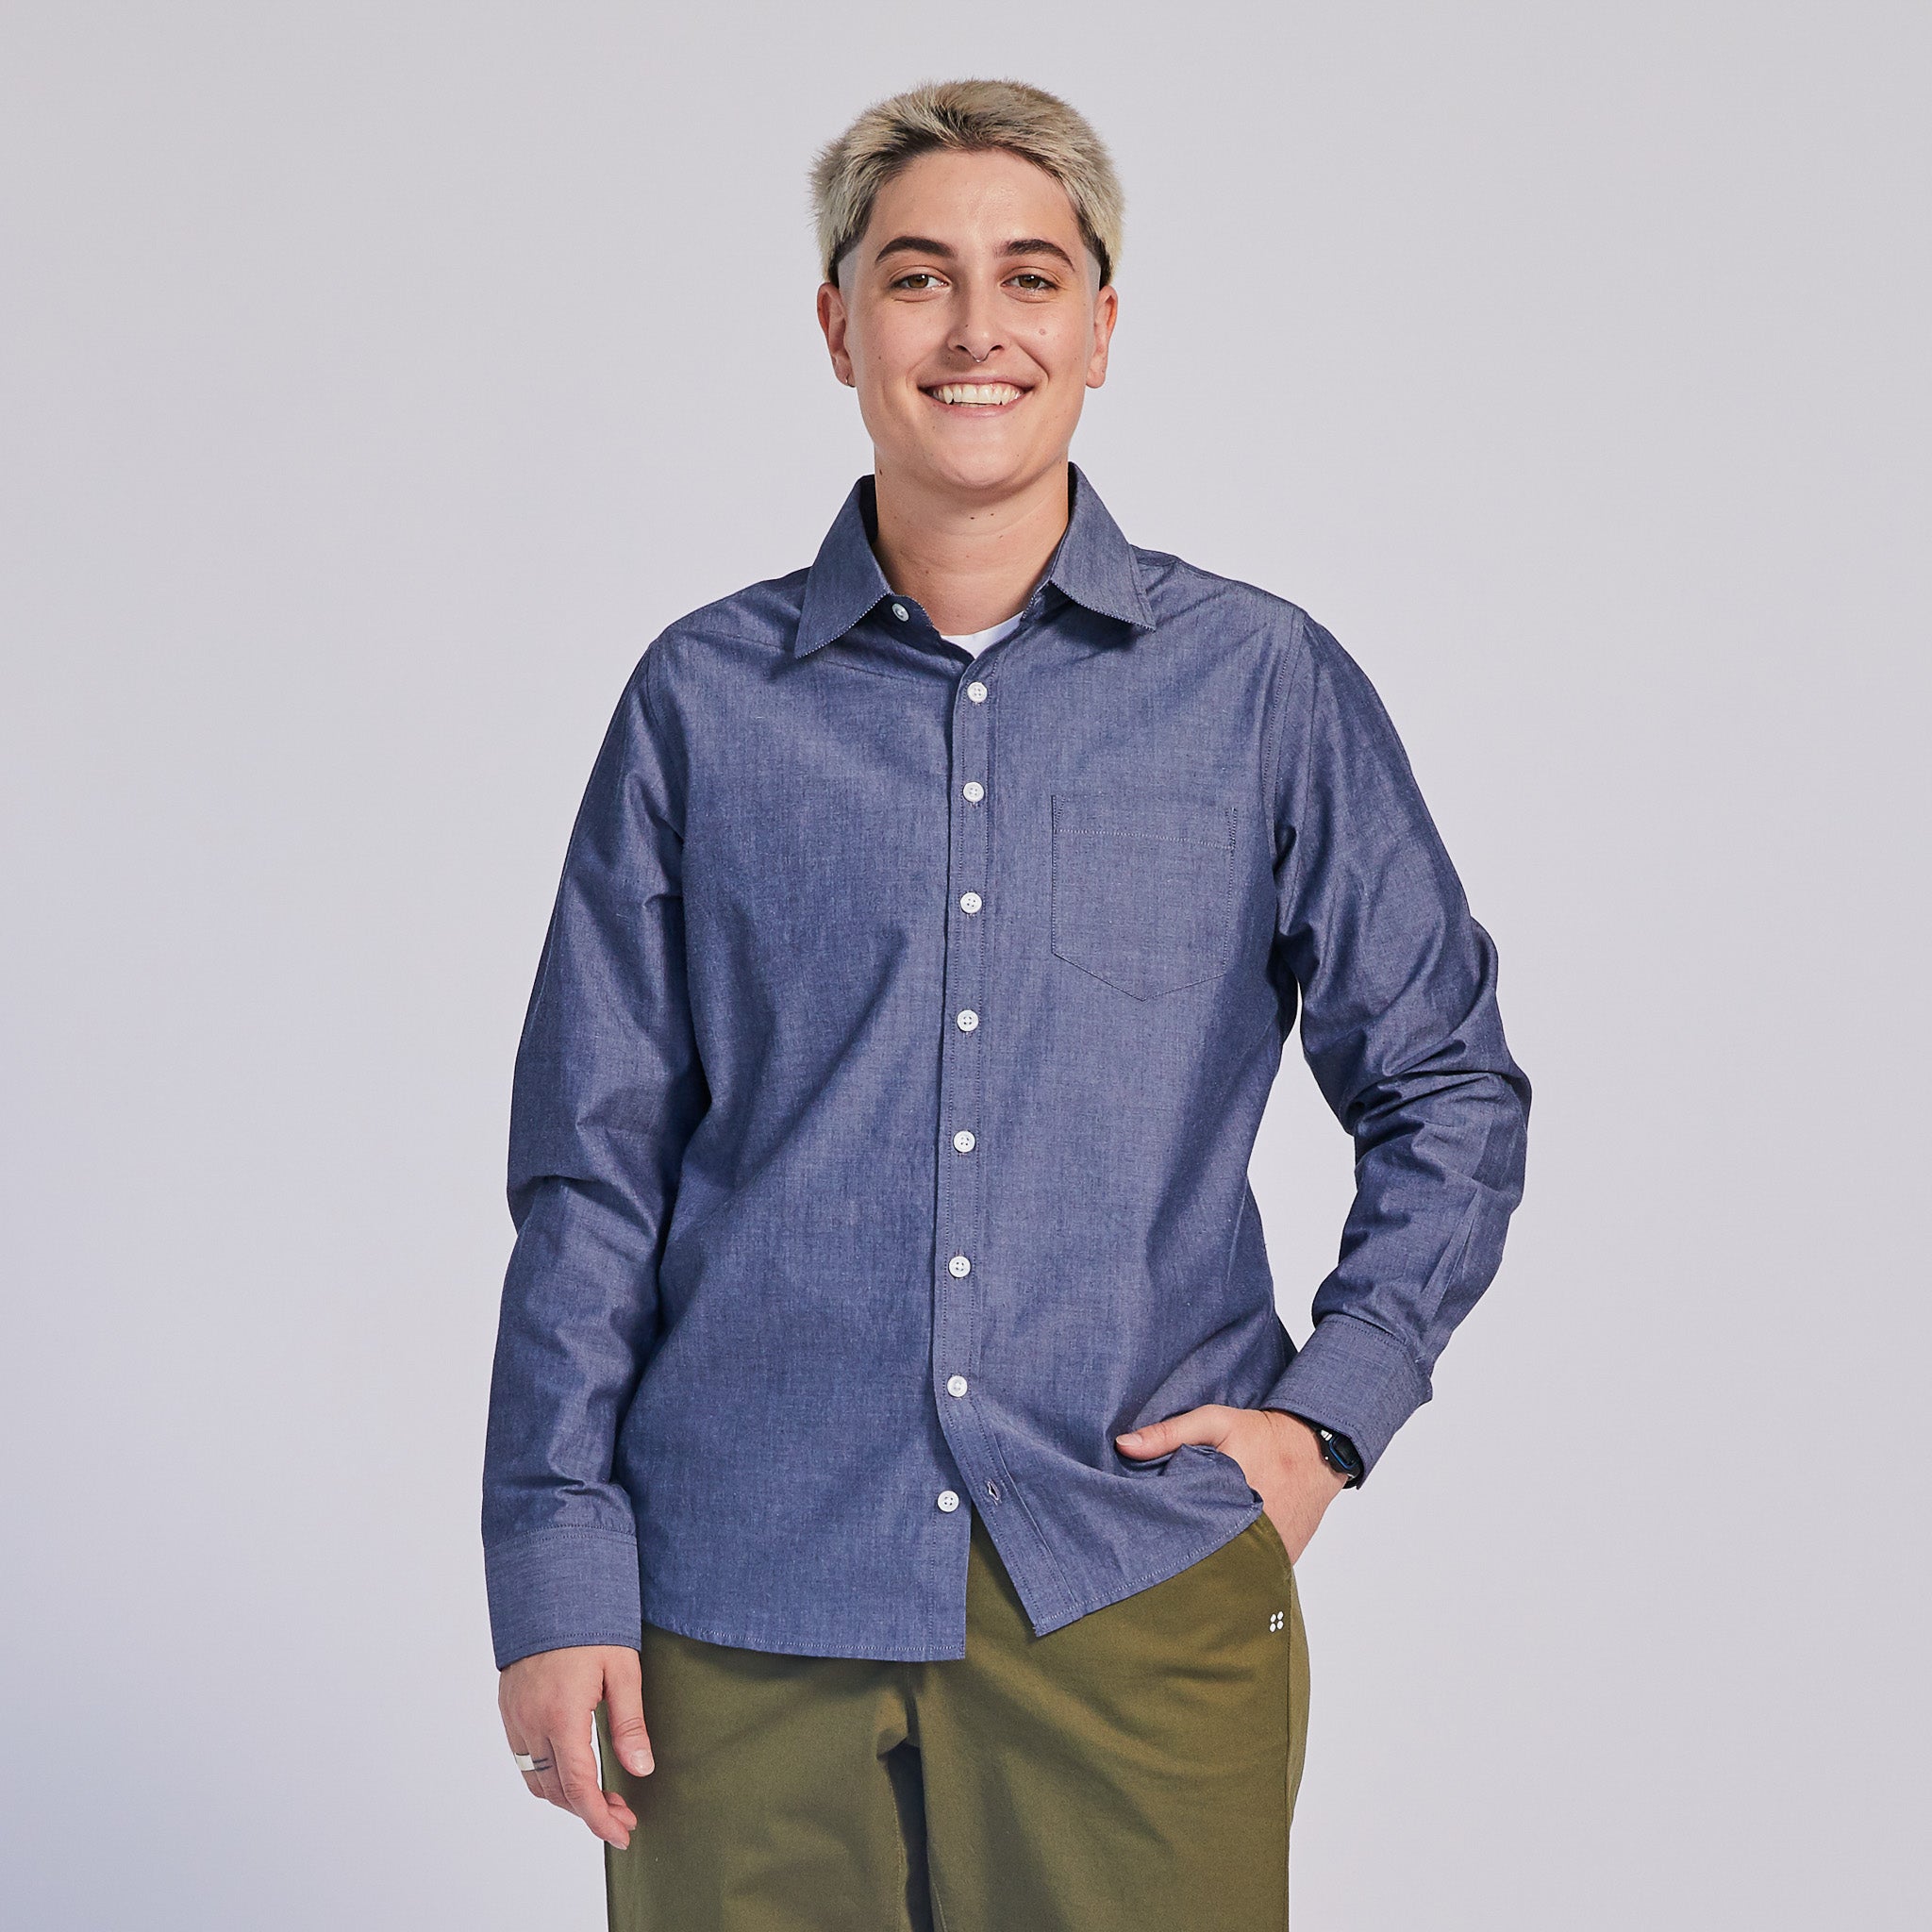 Blue chambray long sleeve shirt for women, AFAB, and non-binary folk